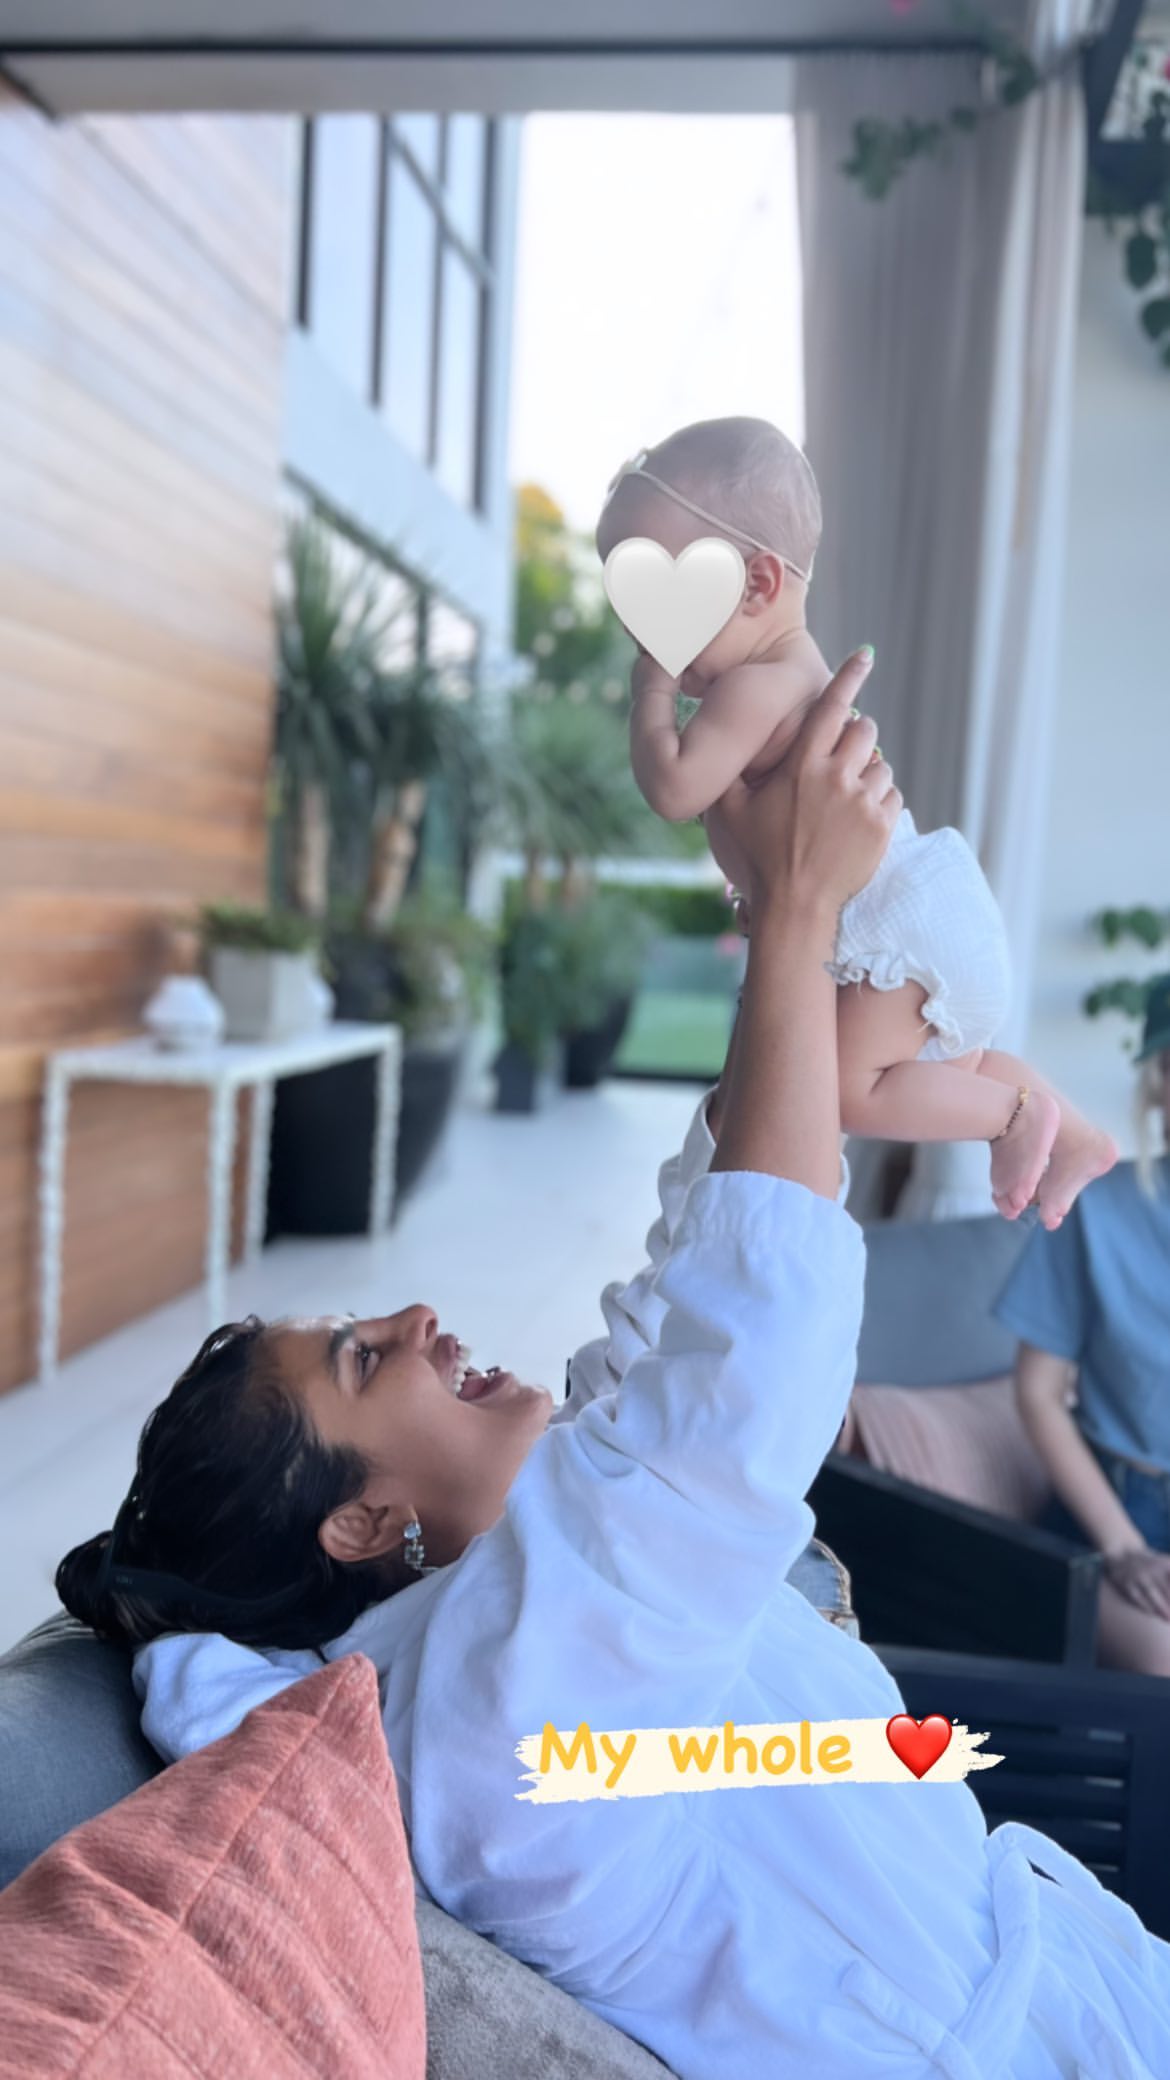 Priyanka Chopra Goes Ecstatic As She Holds Her 'Whole Heart' Malti Marie In Her Arms In New PIC